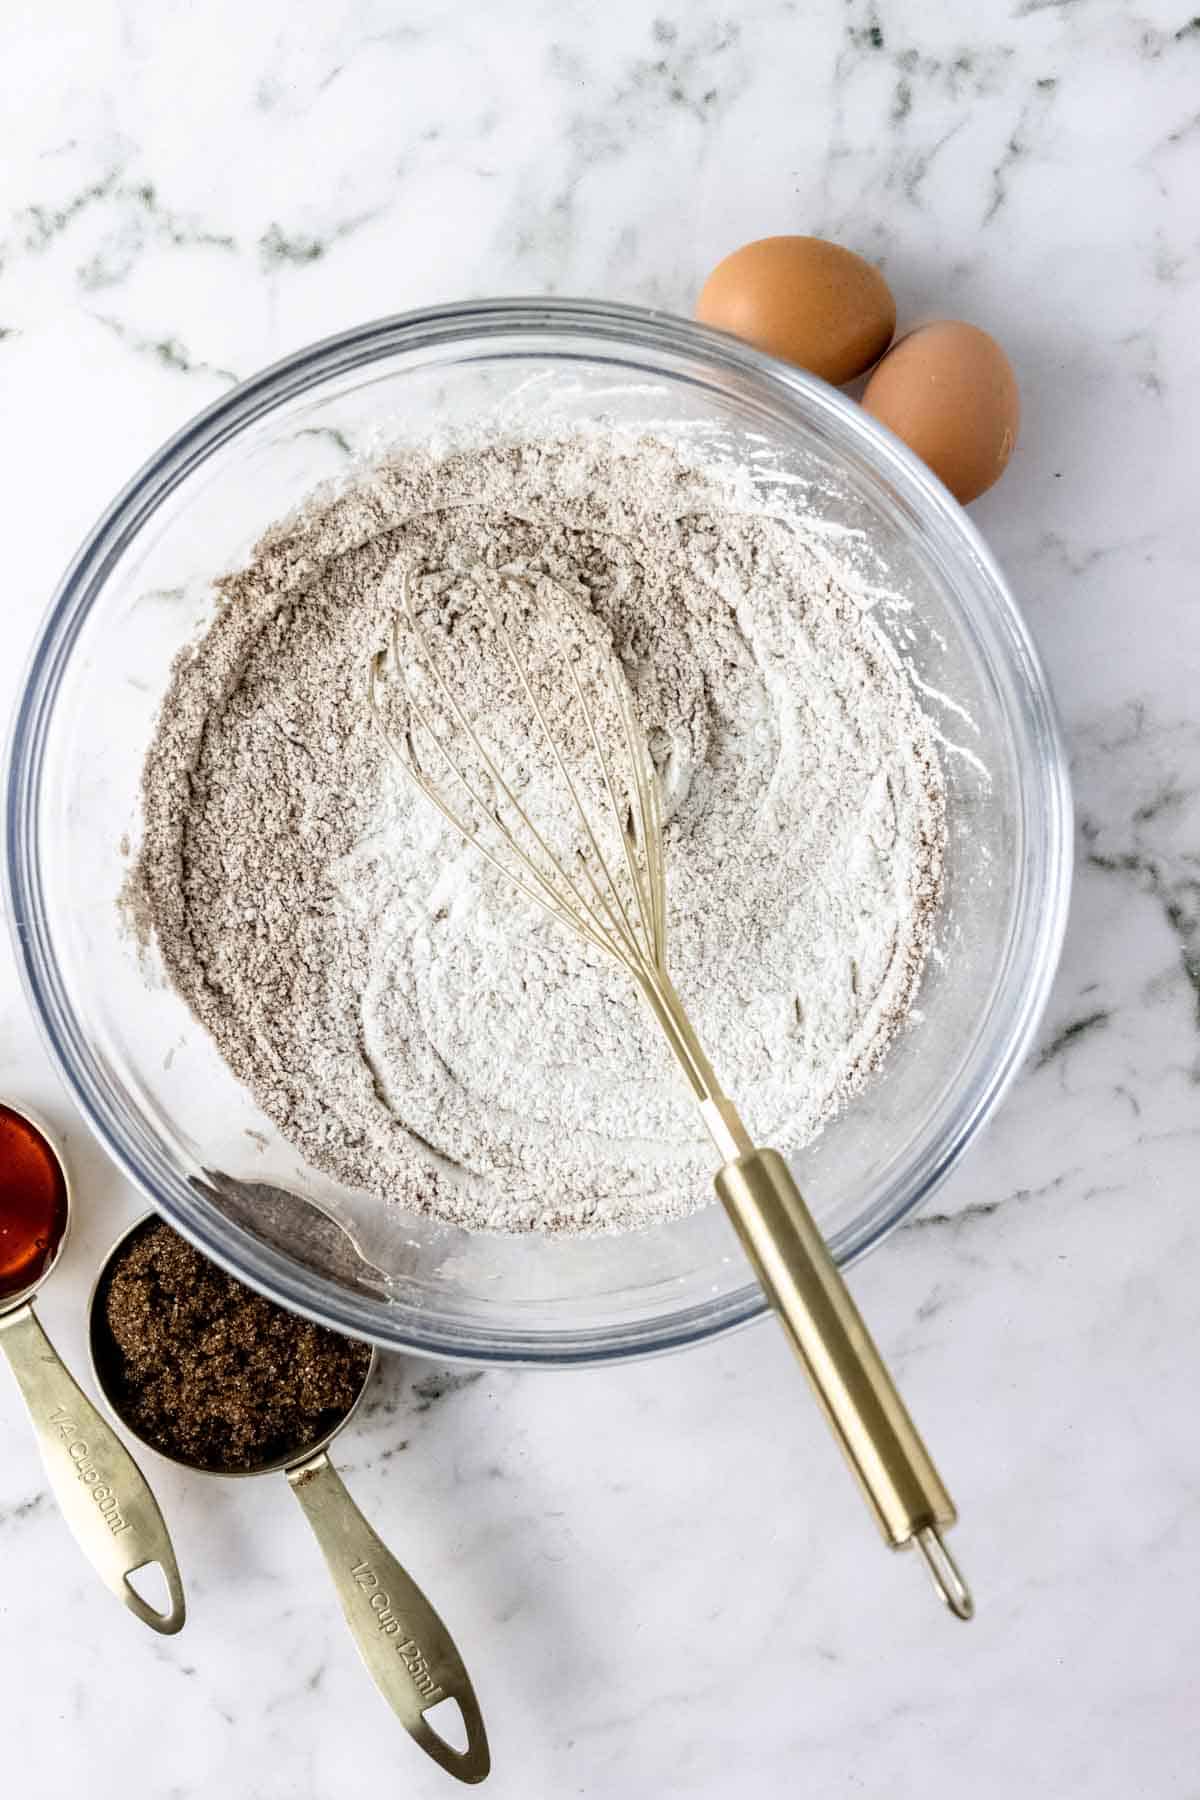 Dry gingerbread ingredients combined in a glass bowl with a whisk.